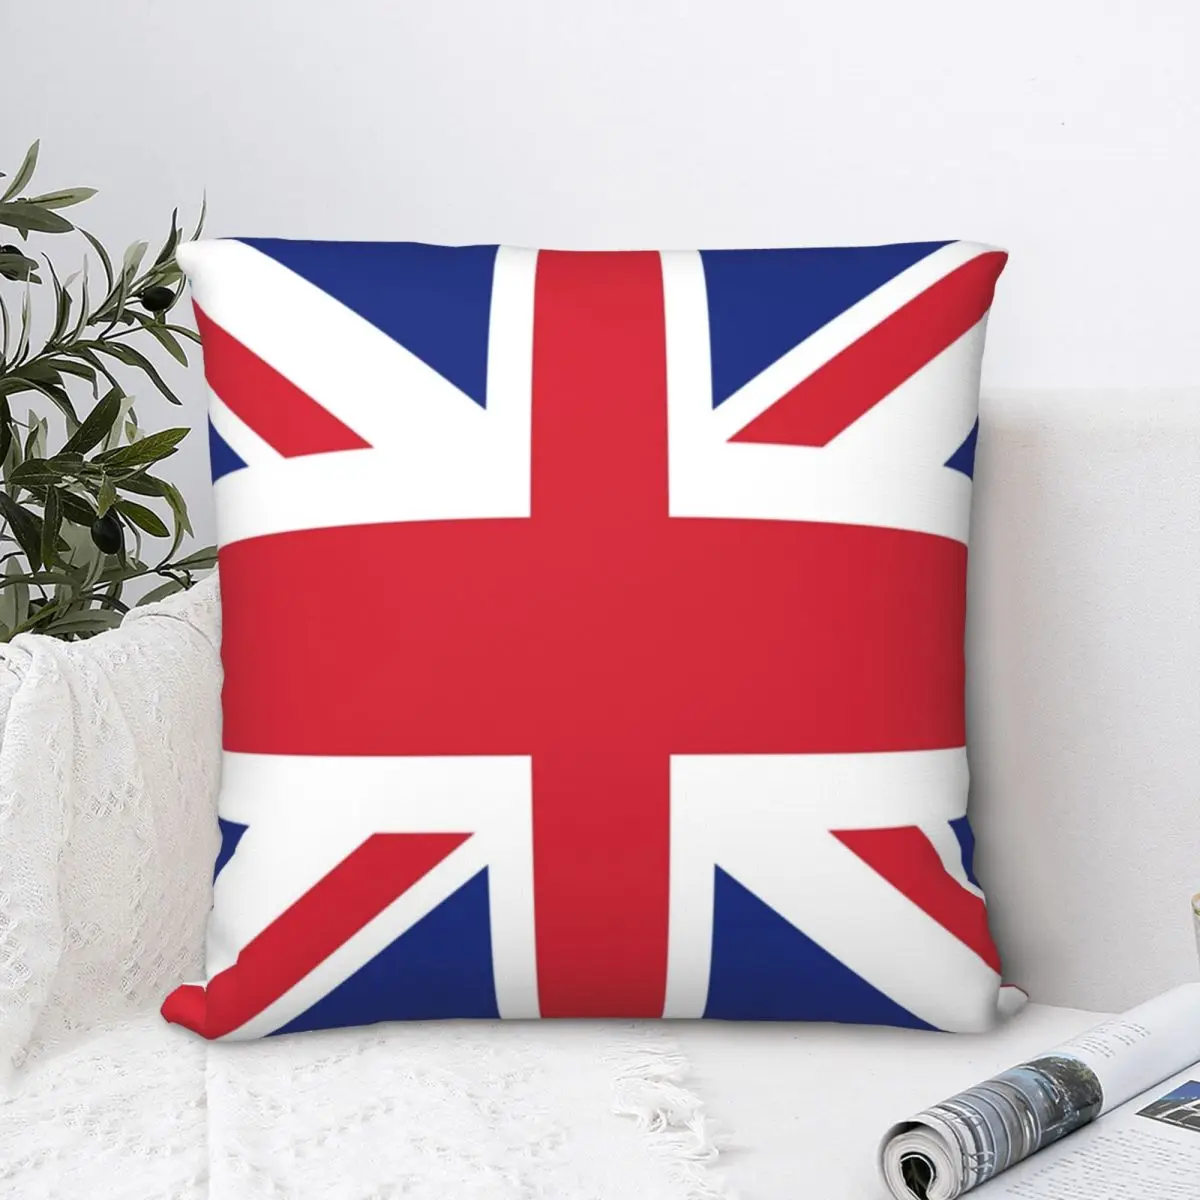 Union Jack Square Pillowcase Cushion Cover Creative Zip Home Decorative Polyester Room Simple 45*45cm